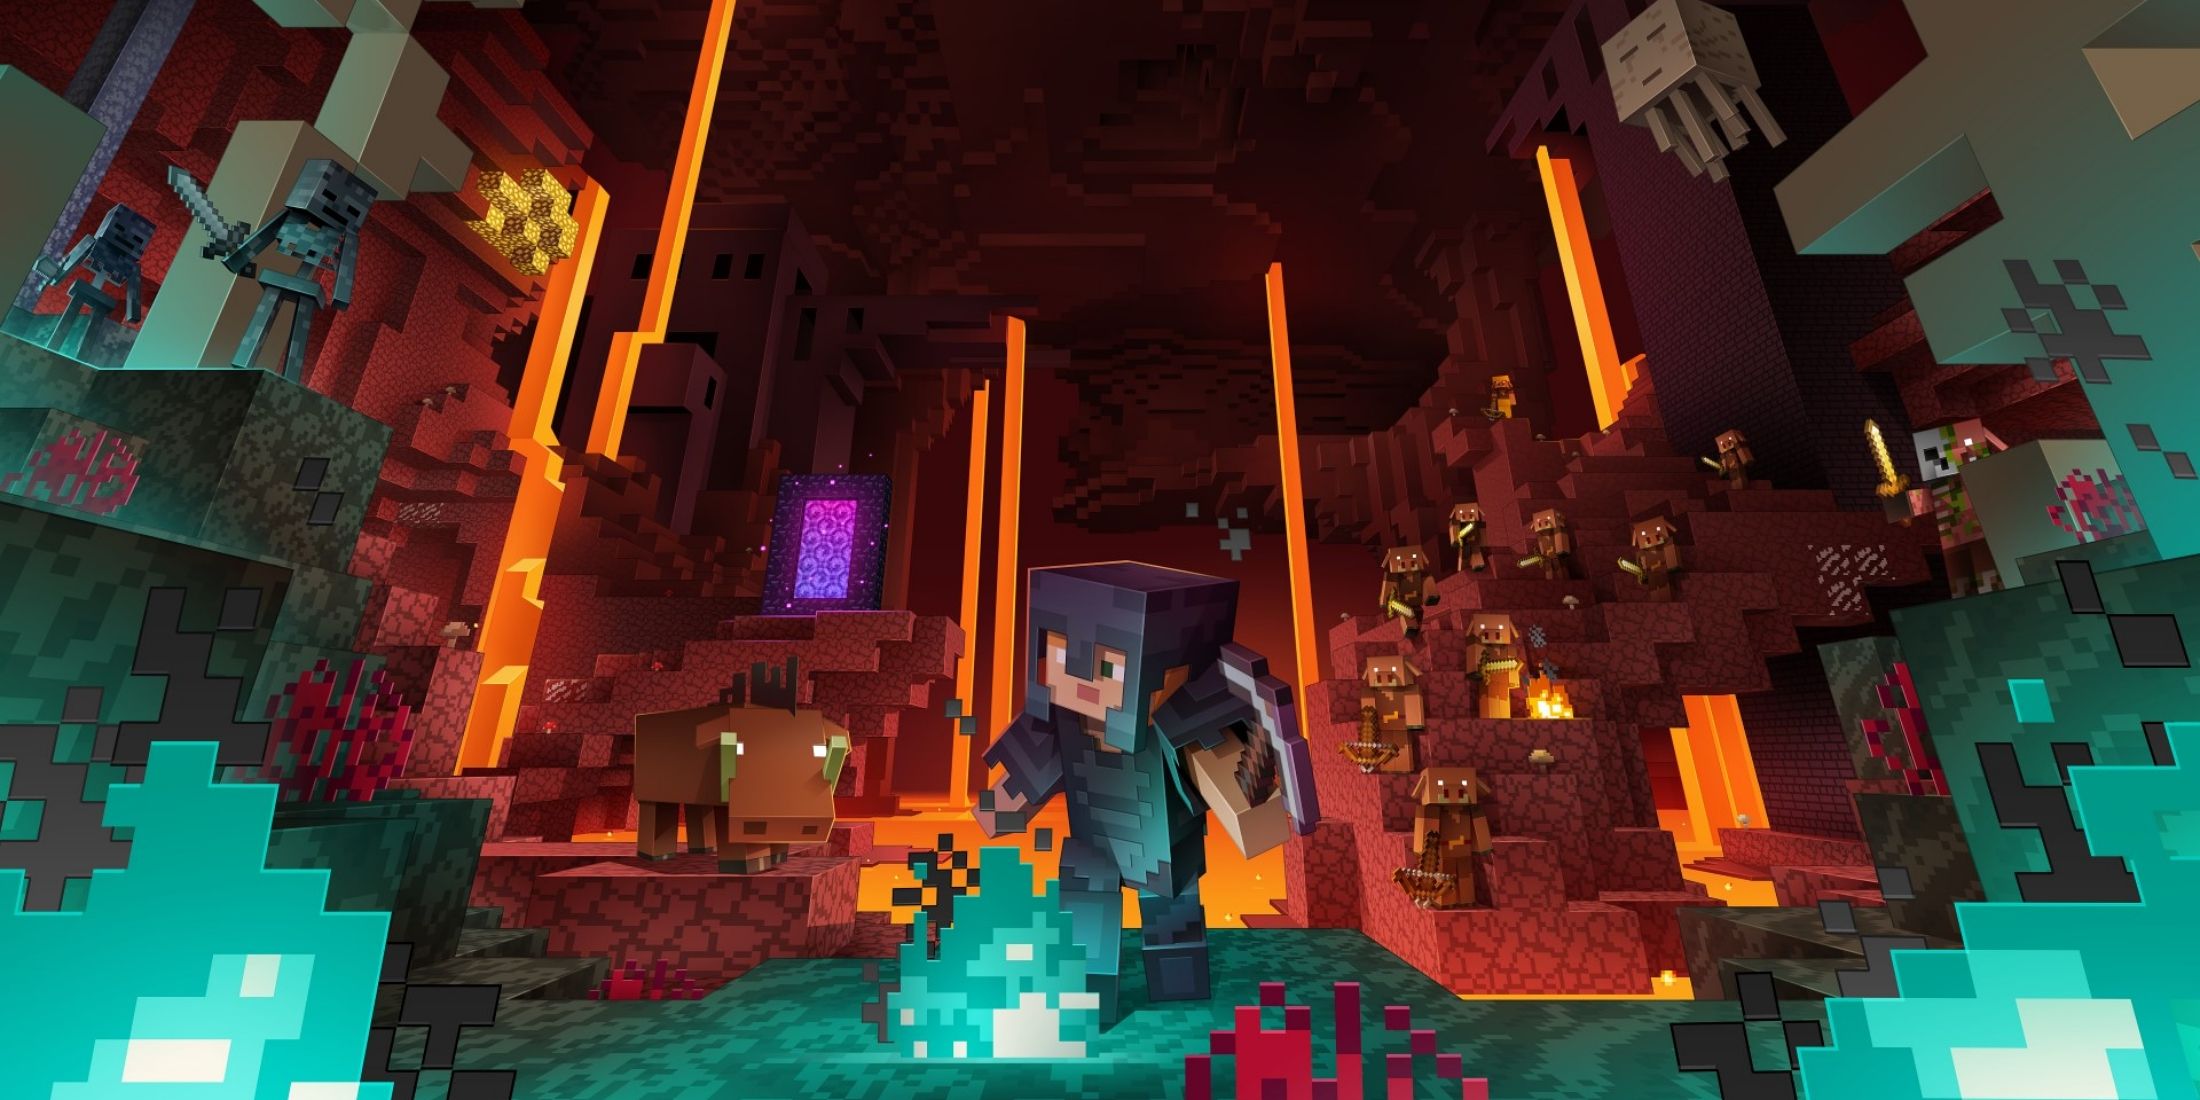 creative-minecraft-player-brings-a-chunk-of-the-nether-into-the-overworld